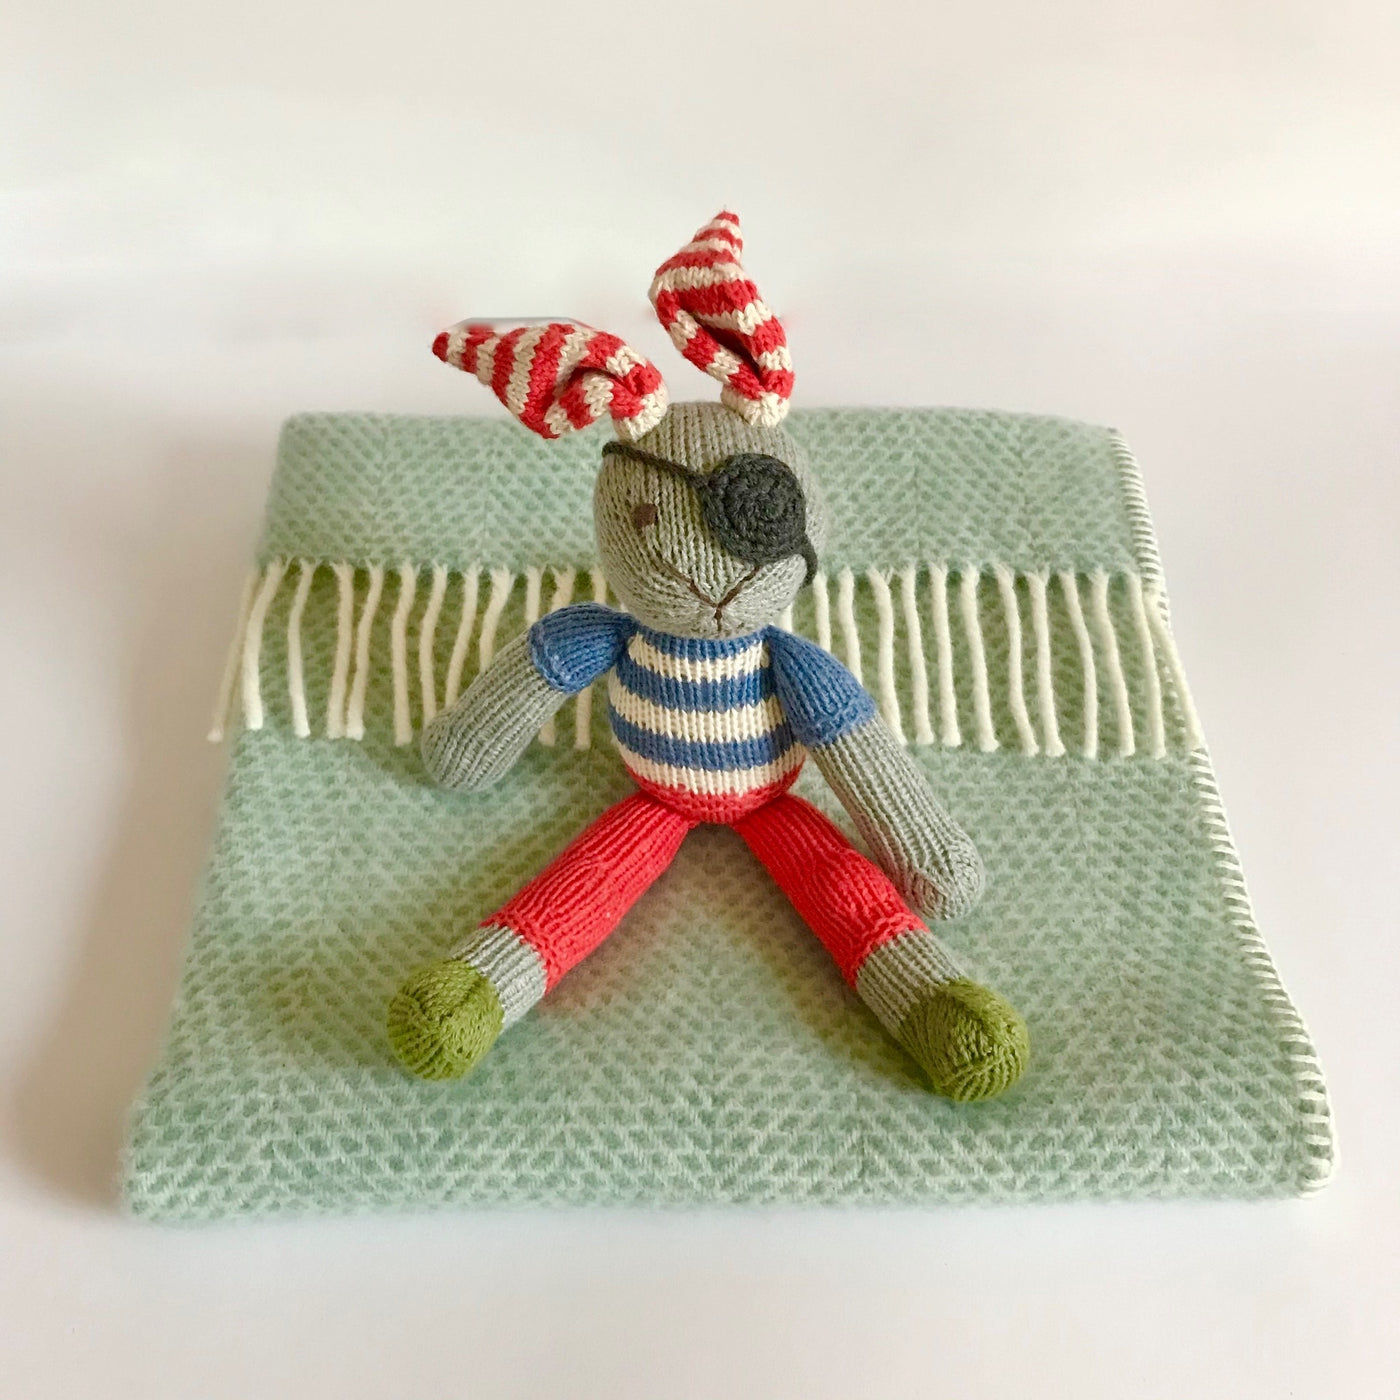 Rory & Ruby pure new wool baby blanket in ocean aqua with organic cotton hand knitted pirate rabbit soft toy with red and white stripy ears and blue and white stripy jumper and an eye patch.